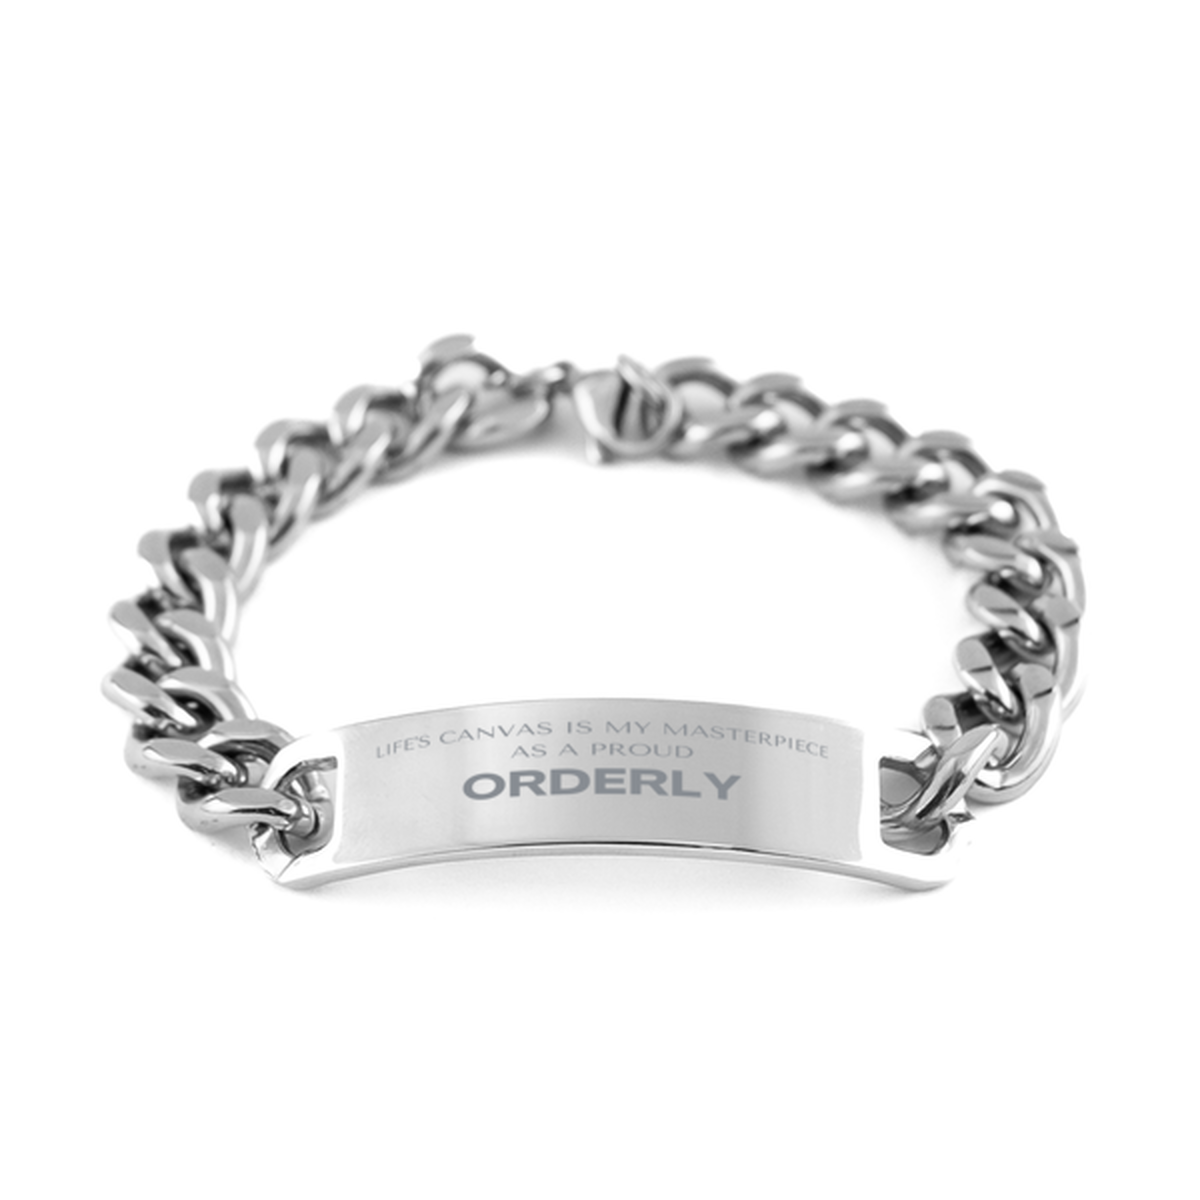 Proud Orderly Gifts, Life's canvas is my masterpiece, Epic Birthday Christmas Unique Cuban Chain Stainless Steel Bracelet For Orderly, Coworkers, Men, Women, Friends